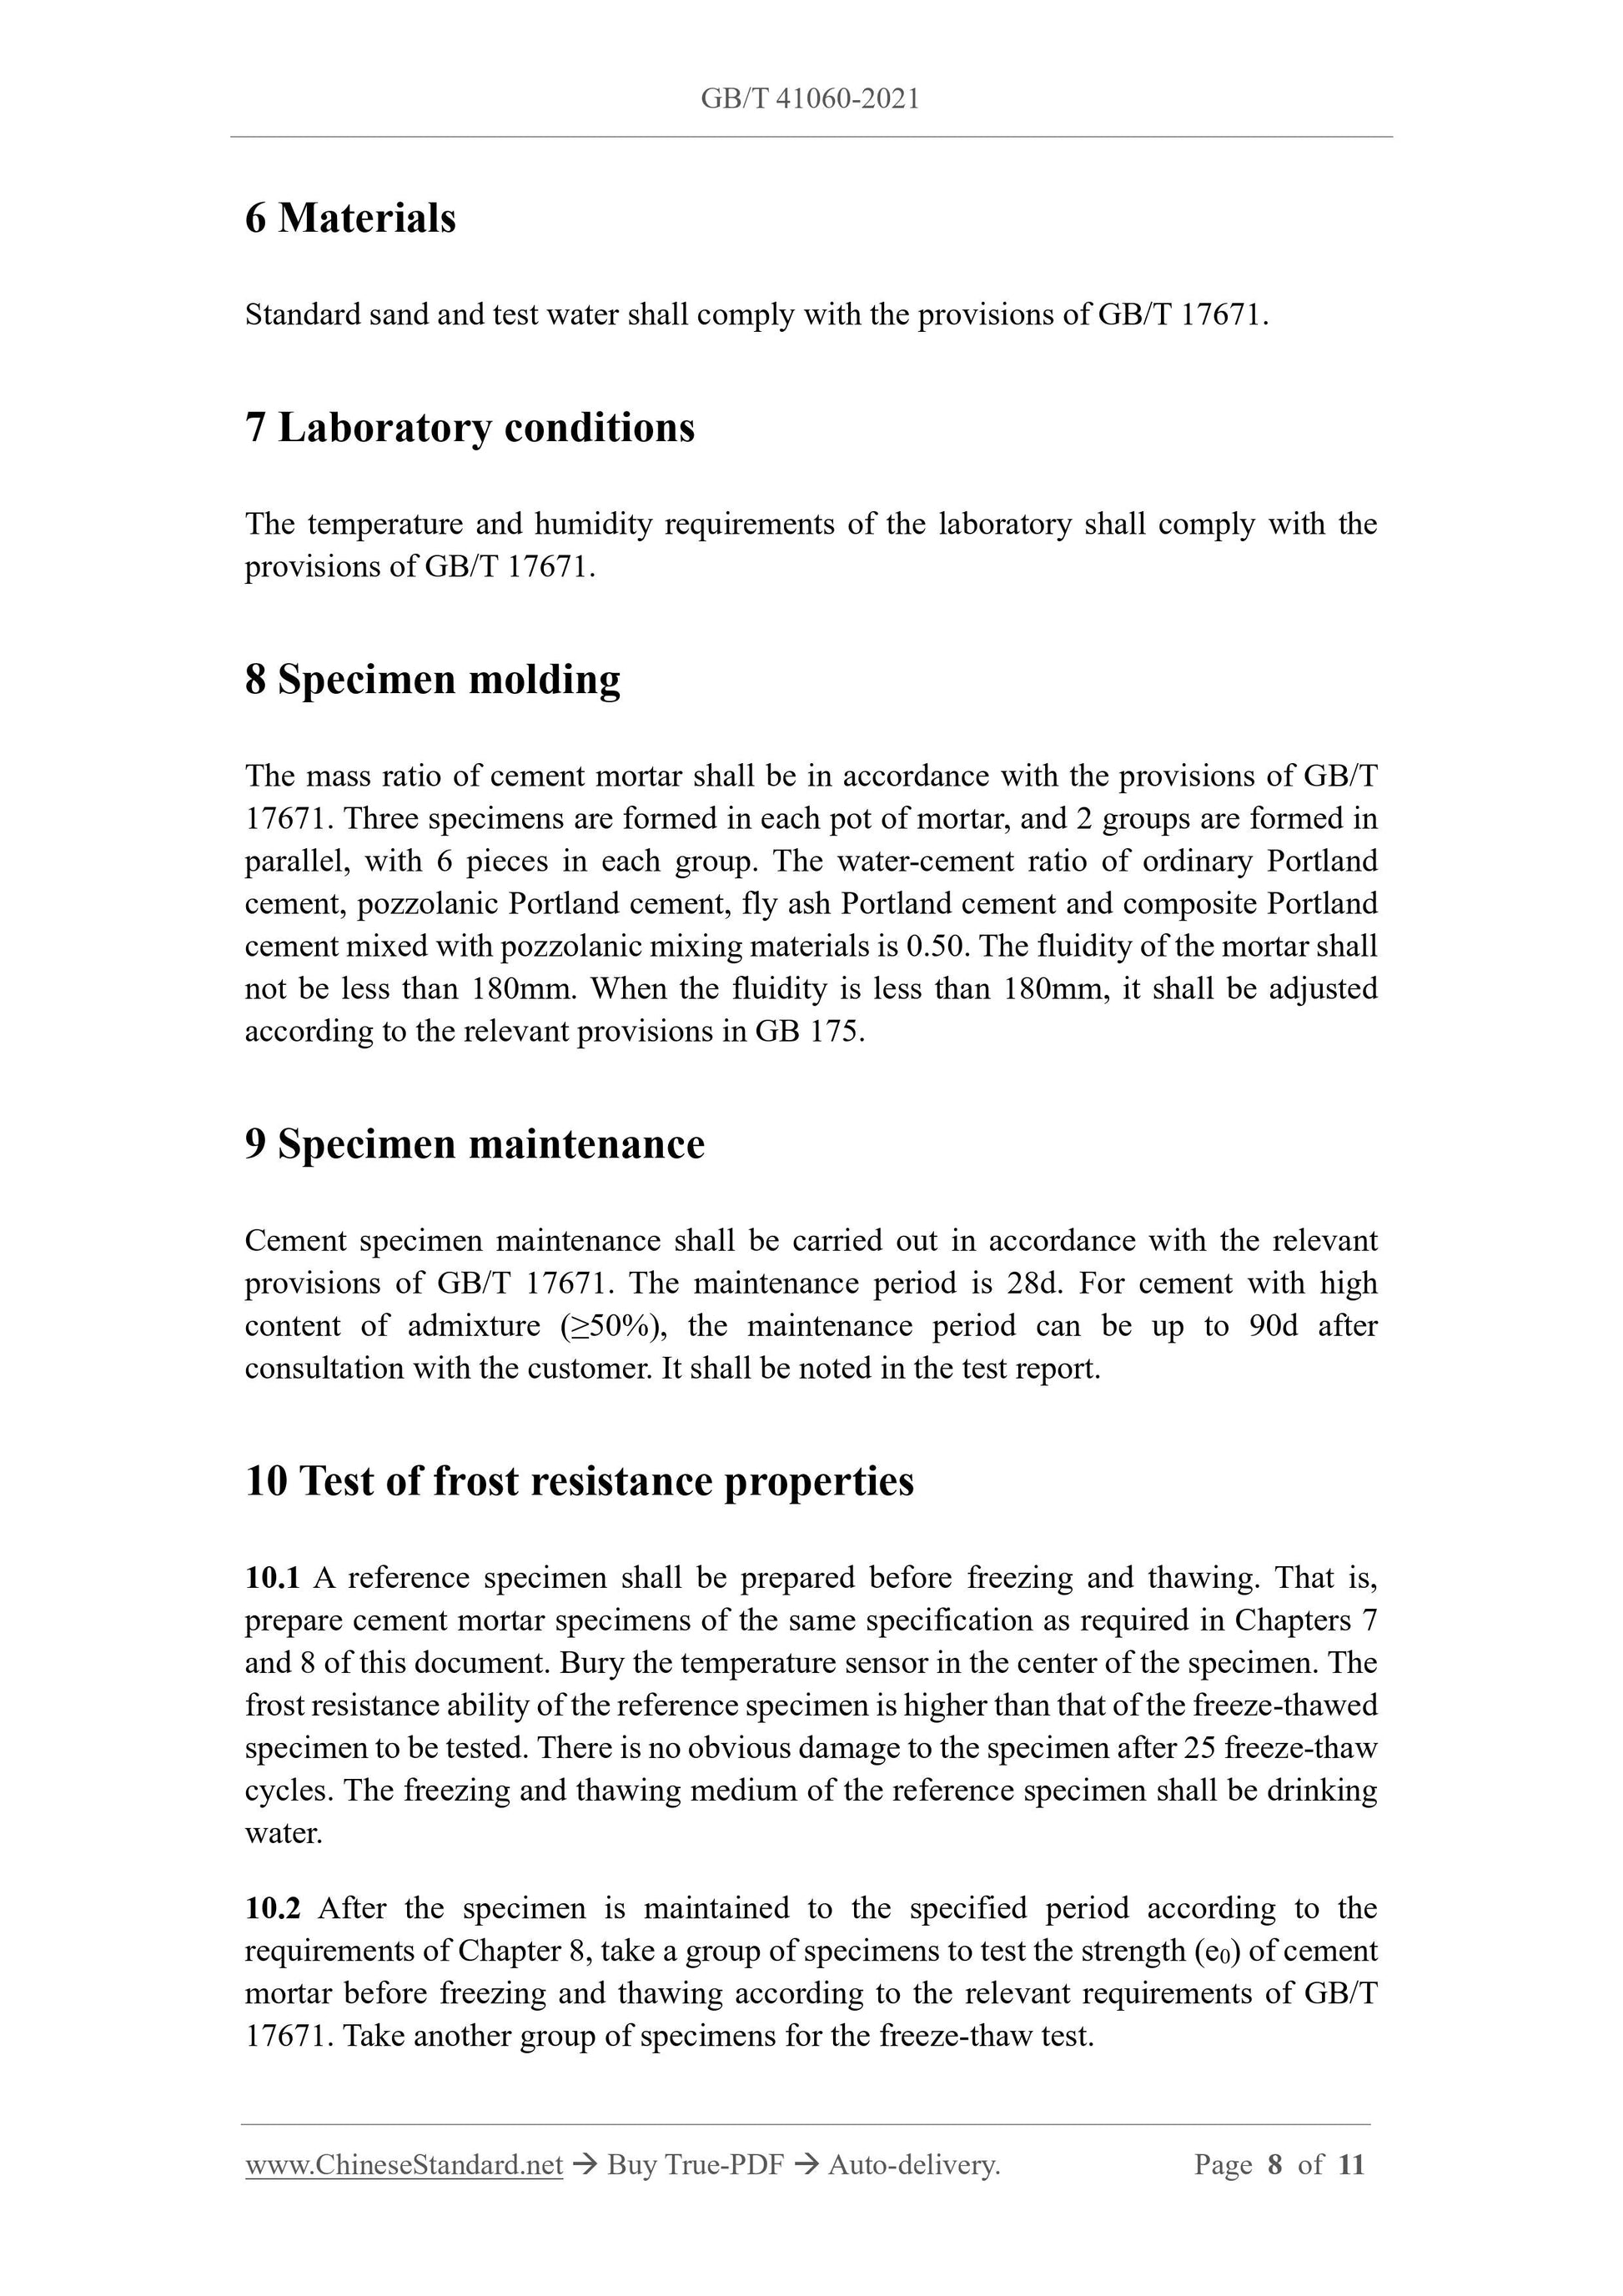 GB/T 41060-2021 Page 5